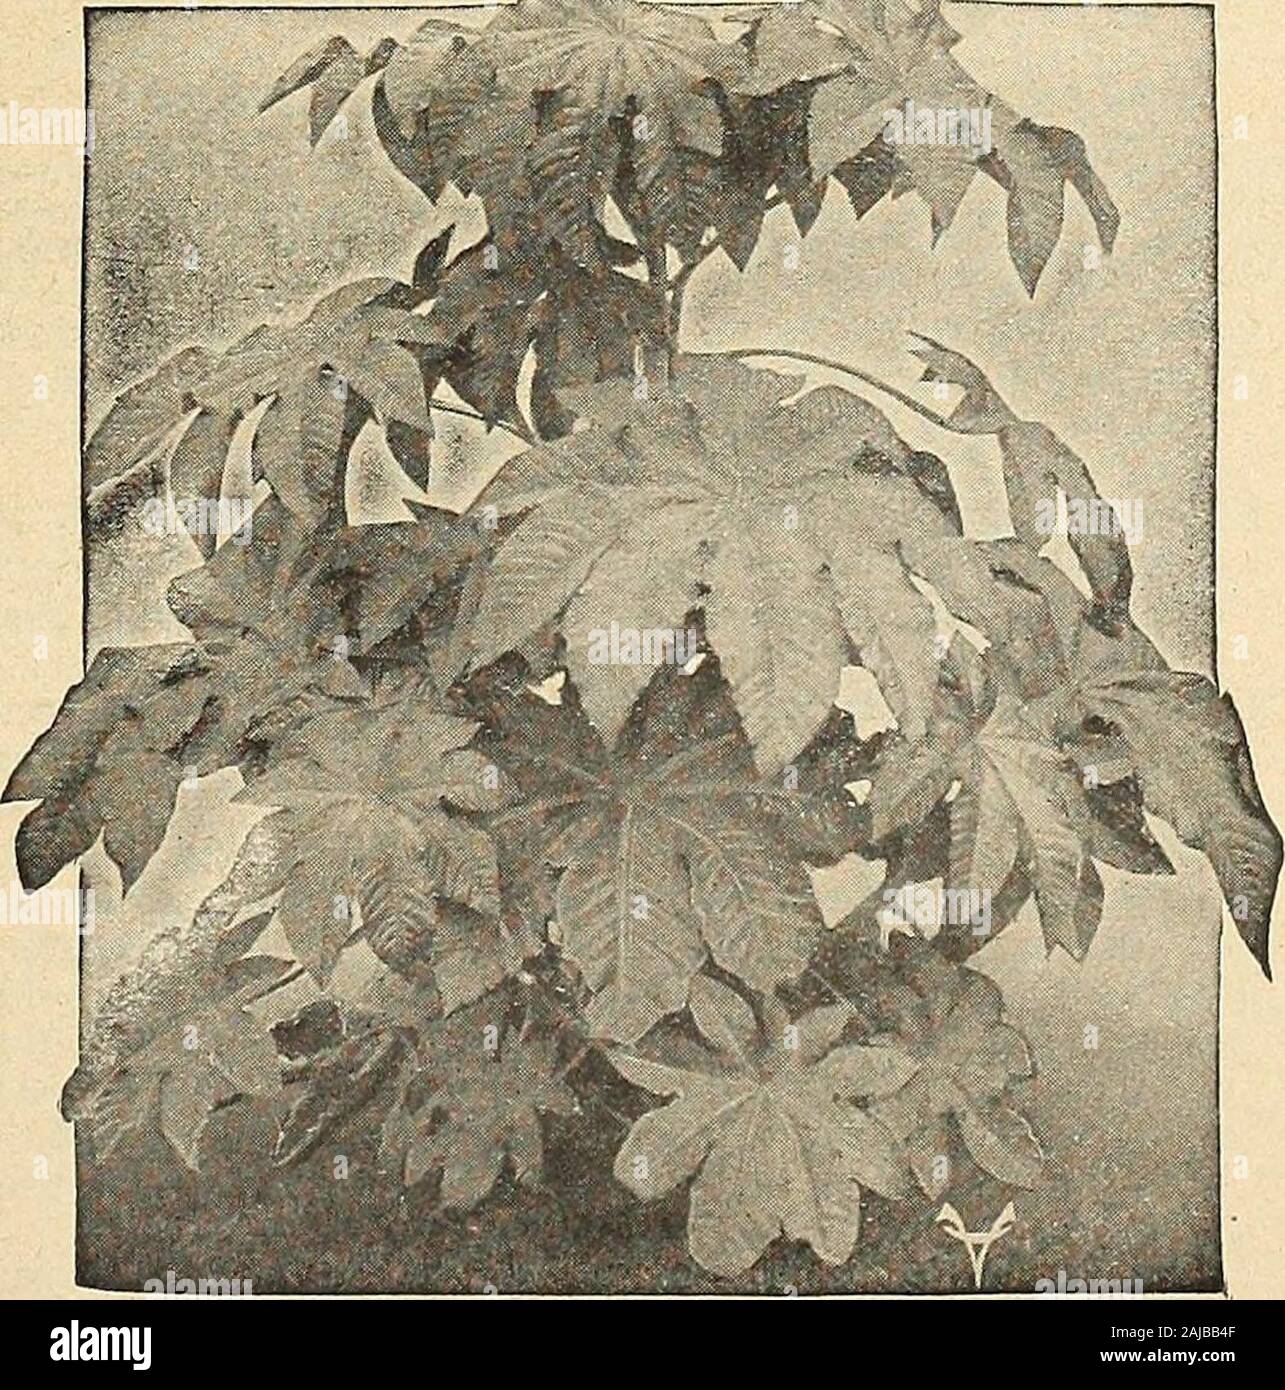 Vaughan's seed store . ms and seeds 1 oz. 10c 05 2936 Zanzibariensis Mixed. 10 to 12 ft. The ornamental leaves, beautifully lobed, are 2J/£ to 4 ft. across. Eachplant makes a perfect pyramid of foliage thickly setfrom top to bottom 1 oz. 15c 05 2937 Zanzibar Enormis 1 oz. 15c 05 2938 Mixed. Many sorts. Lb. 60c 1 oz. 10c 05 2940 ROSE Polyantha Nana. 1 ft. Miniature Fairy Roses, forming little bushes covered with dainty little singleand semi-double flowers, six months after sowing 10 2942 RUDBECKIA Bicolor Superba (Coneflower) O 2 ft. Produces an abundance of aright yellow flowers withbrown cent Stock Photo